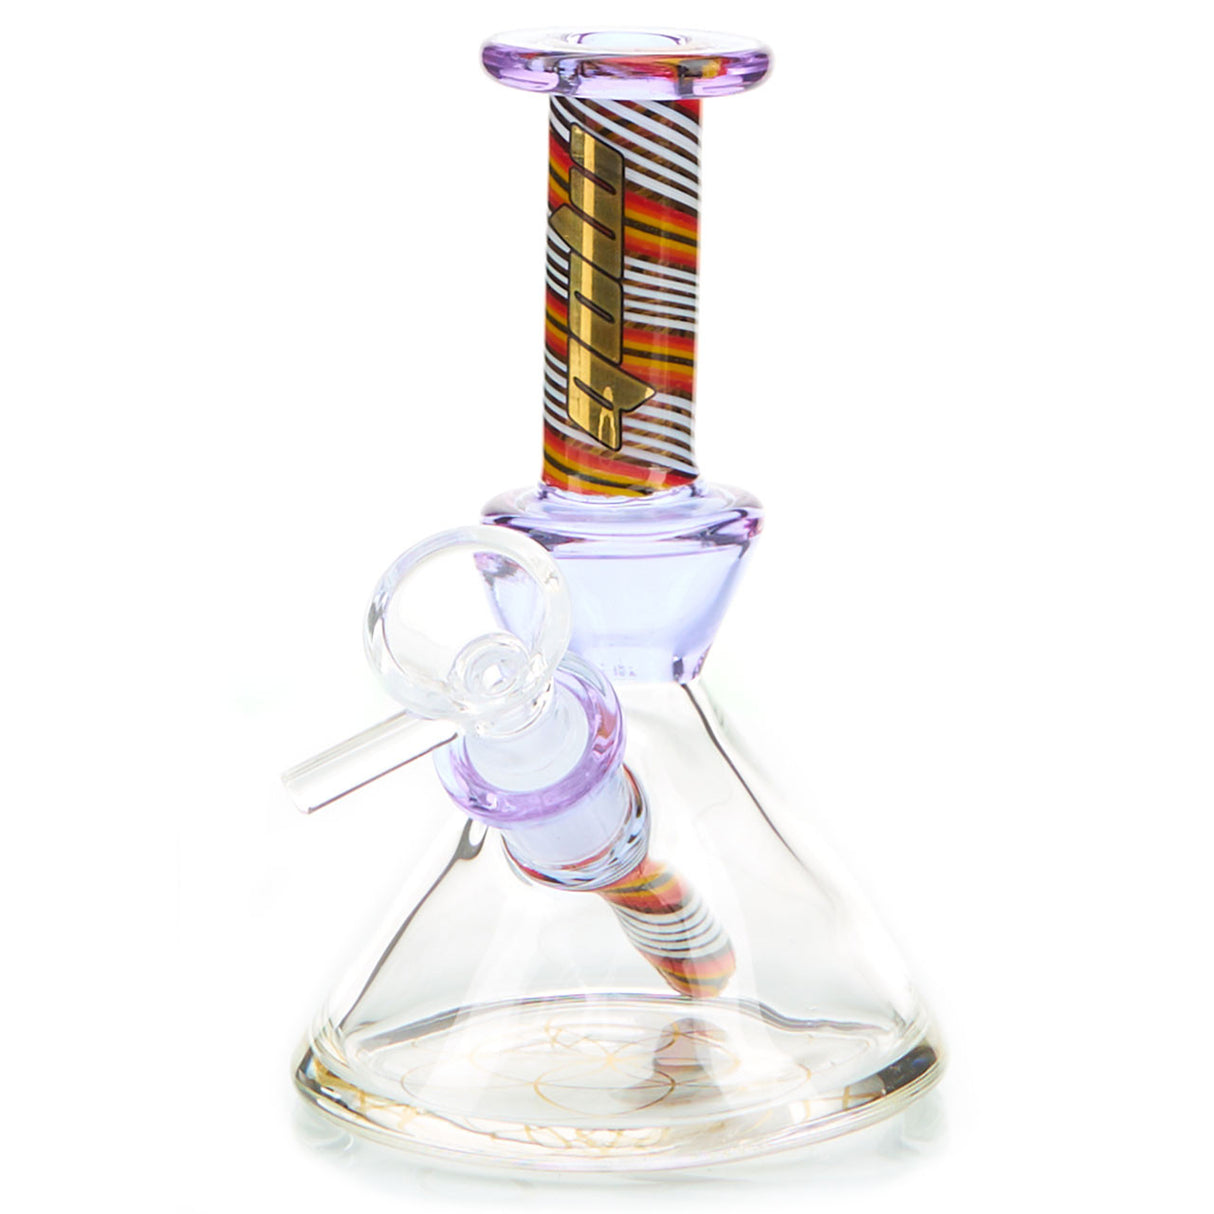 MOB Glass Trance Dab Rig with Worked Glass Neck and Diffused Down stem. Mini beaker style design 3